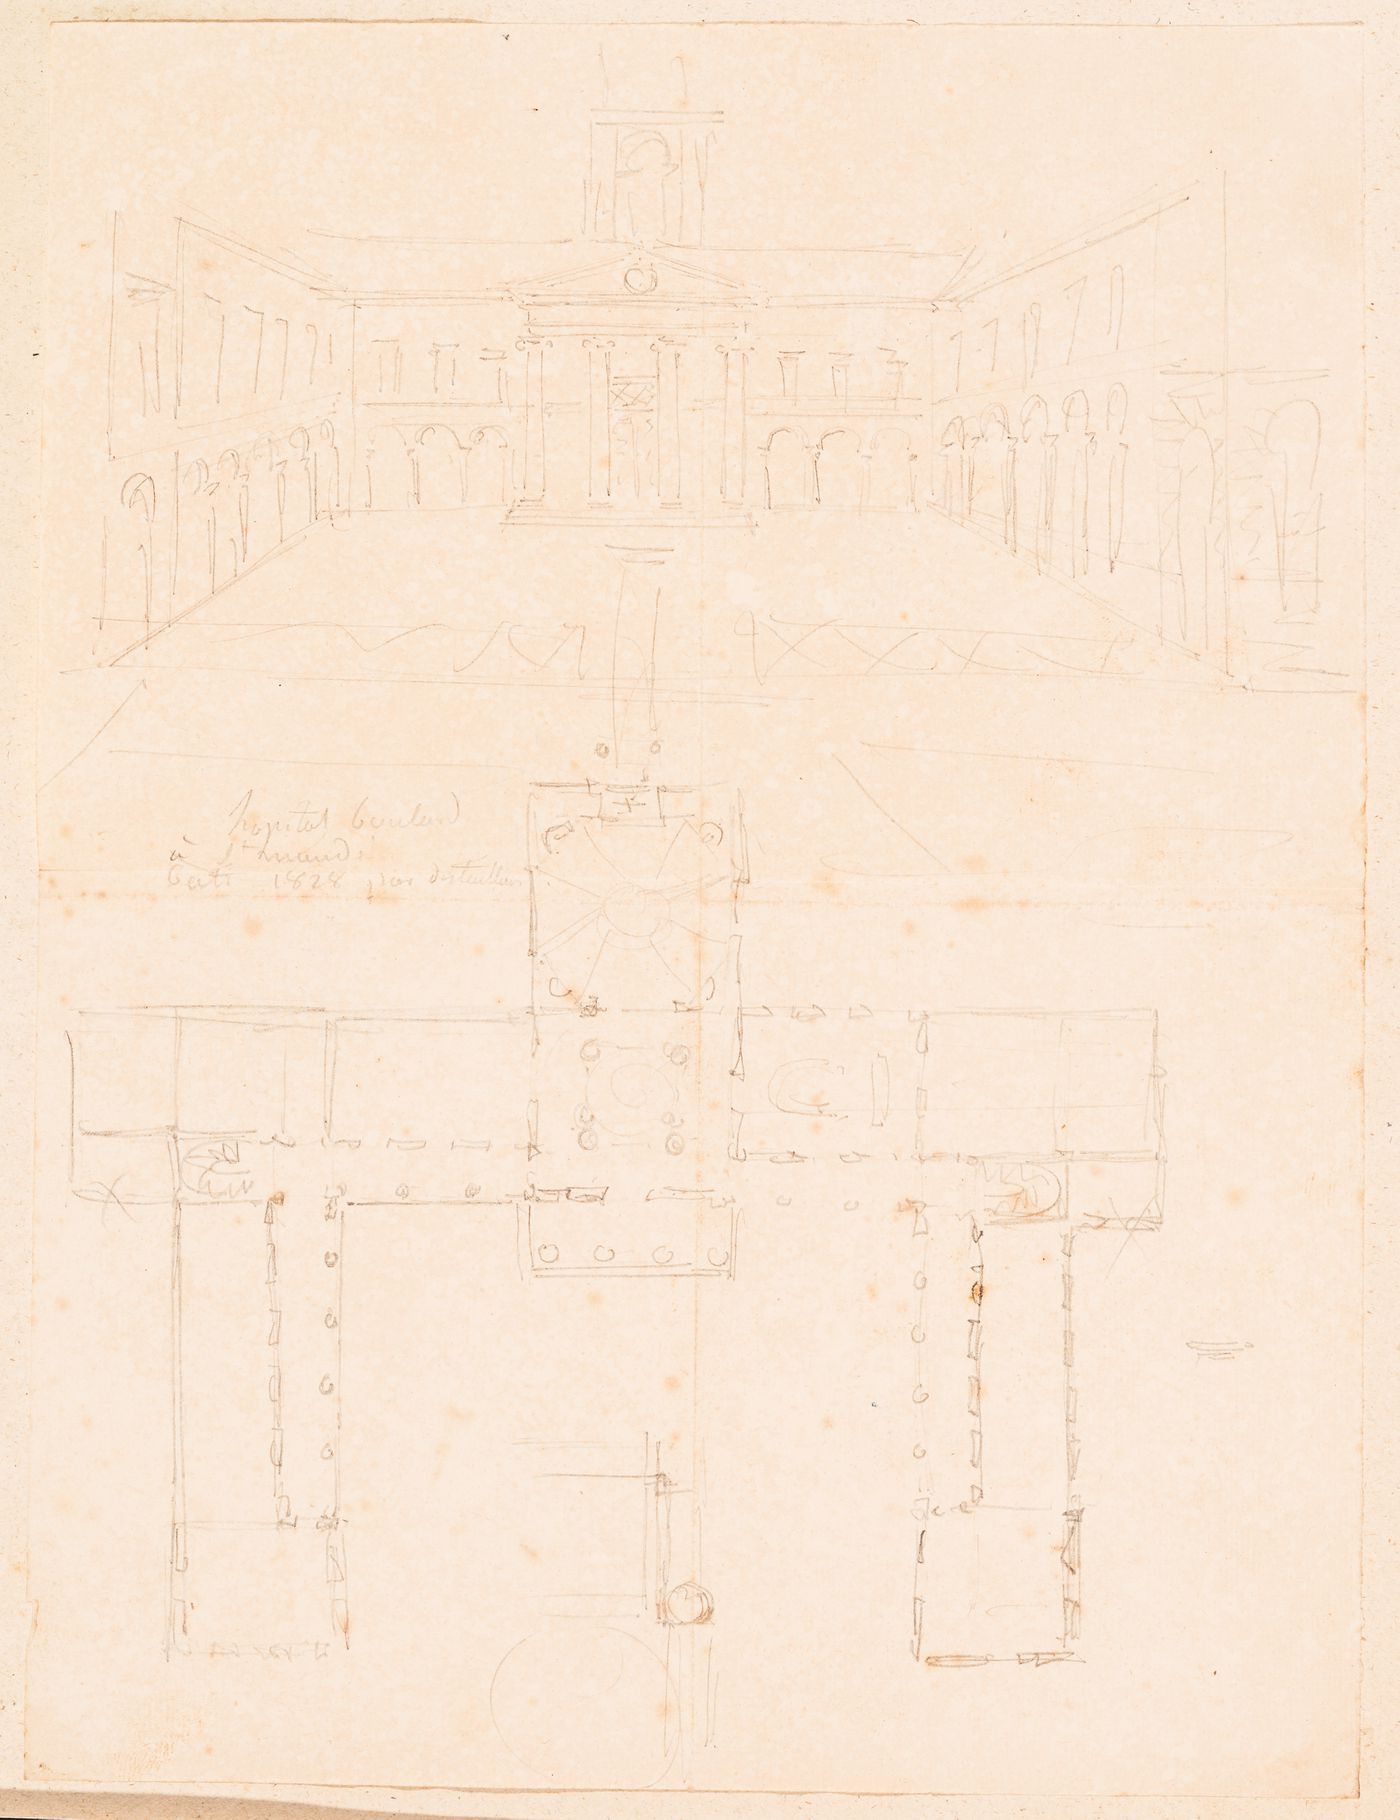 Perspective drawing and plan of an unidentified hospital